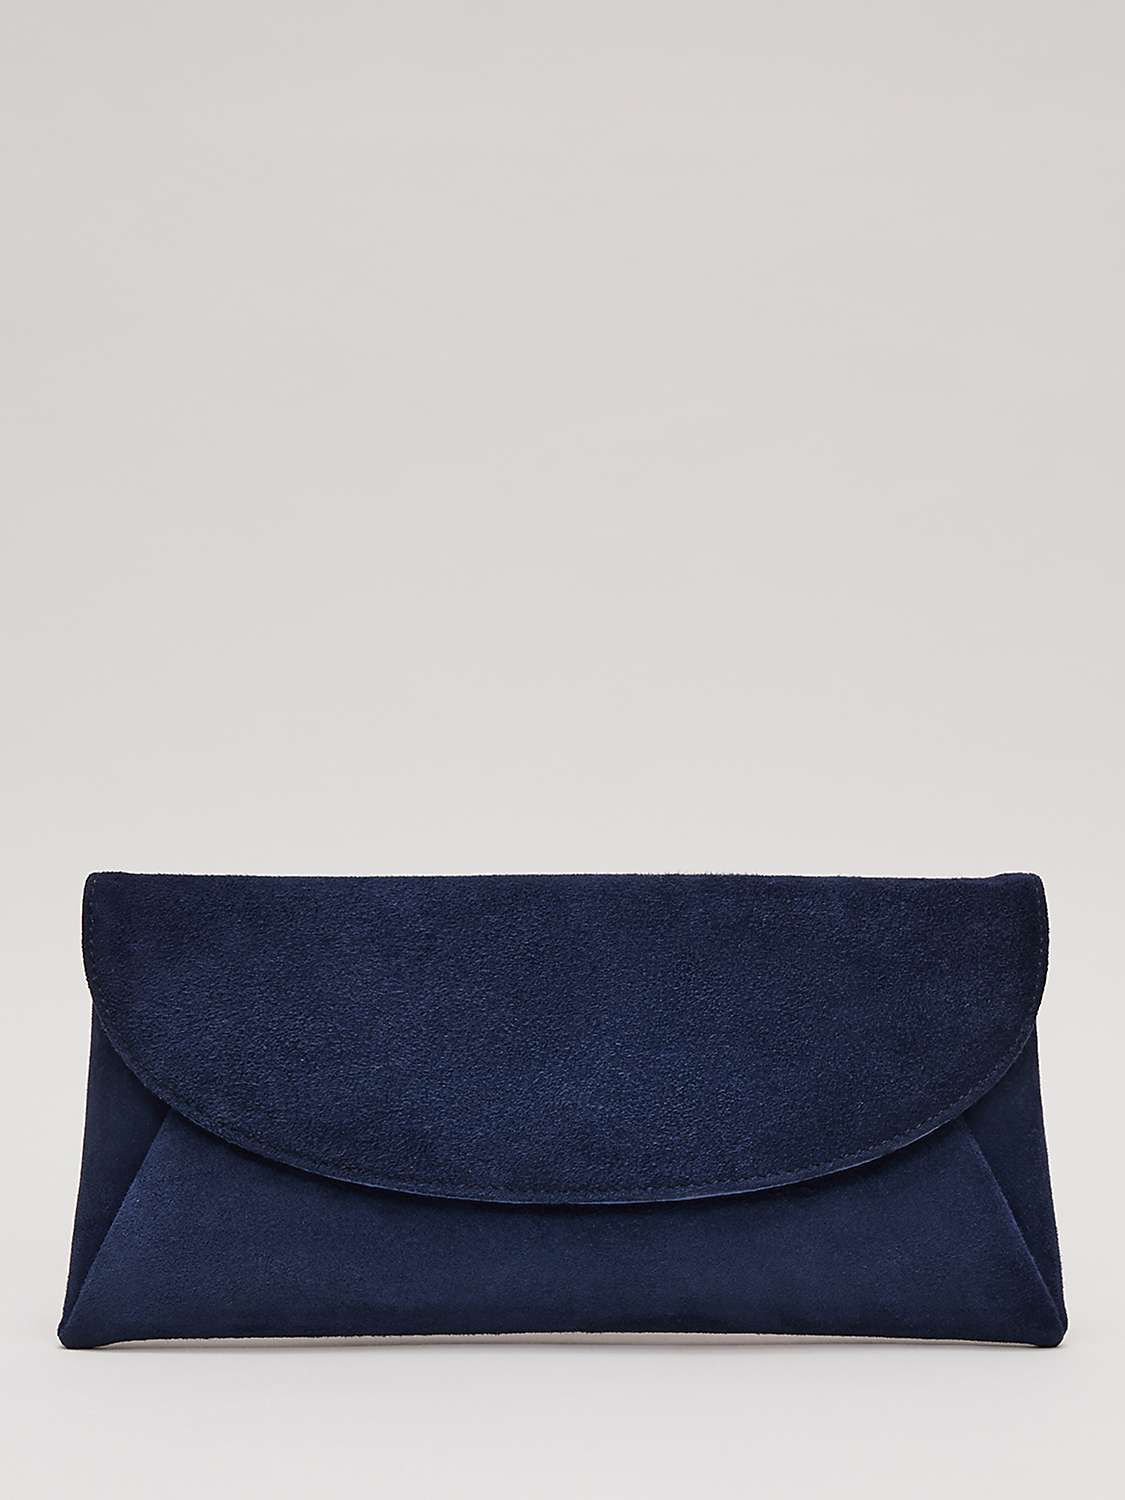 Buy Phase Eight Suede Clutch Bag Online at johnlewis.com